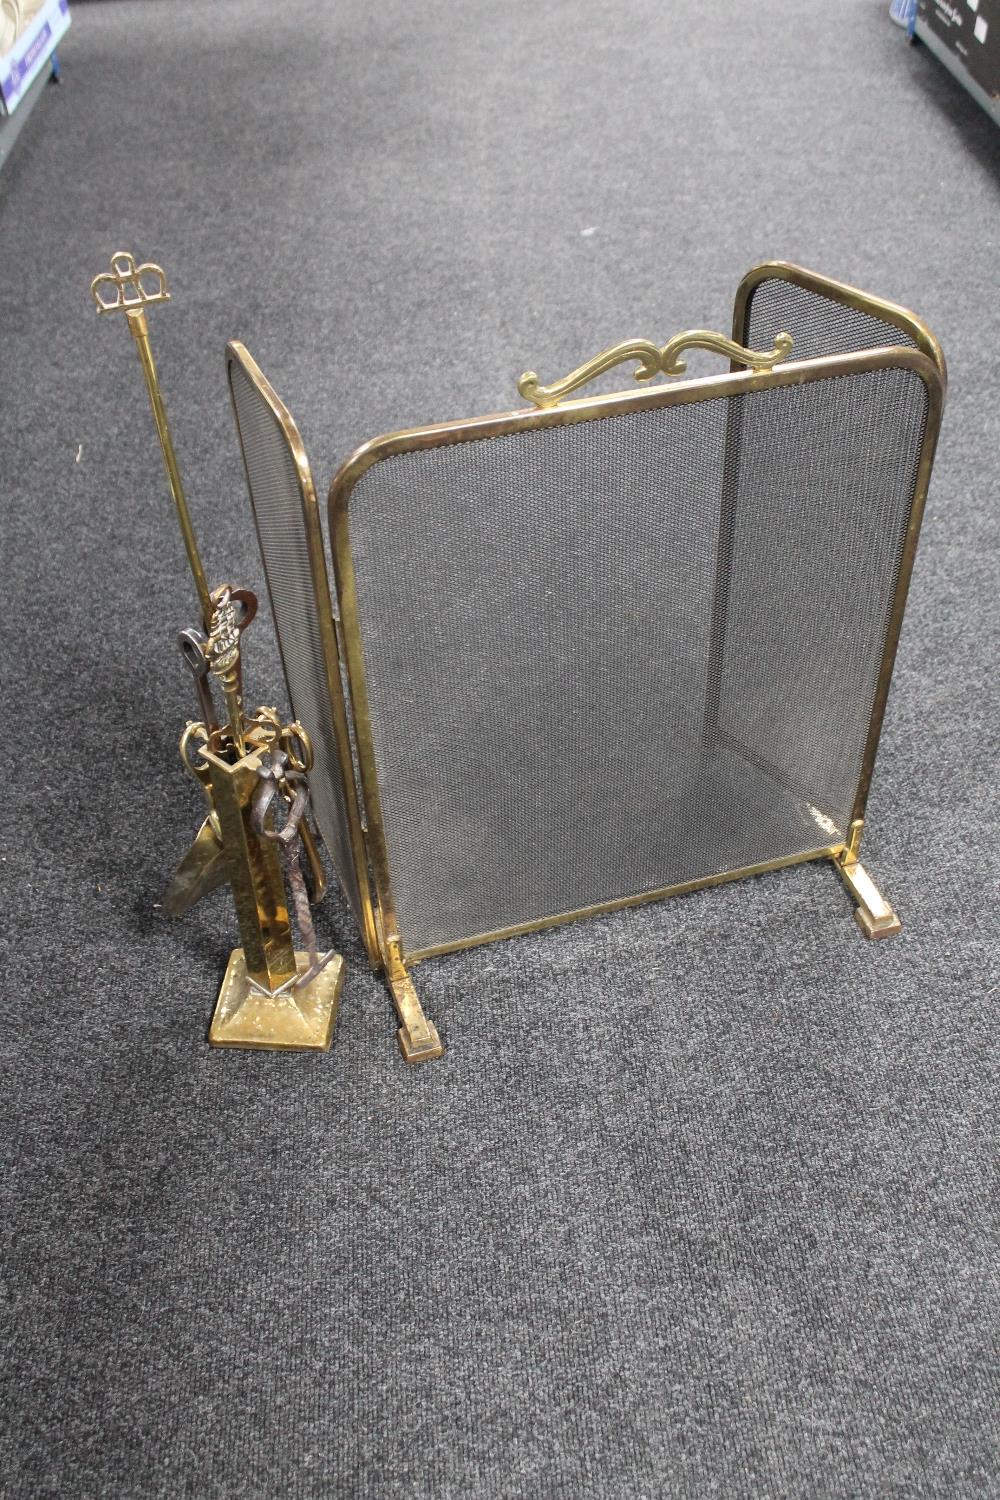 An antique brass three way folding fire screen together with a brass companion set